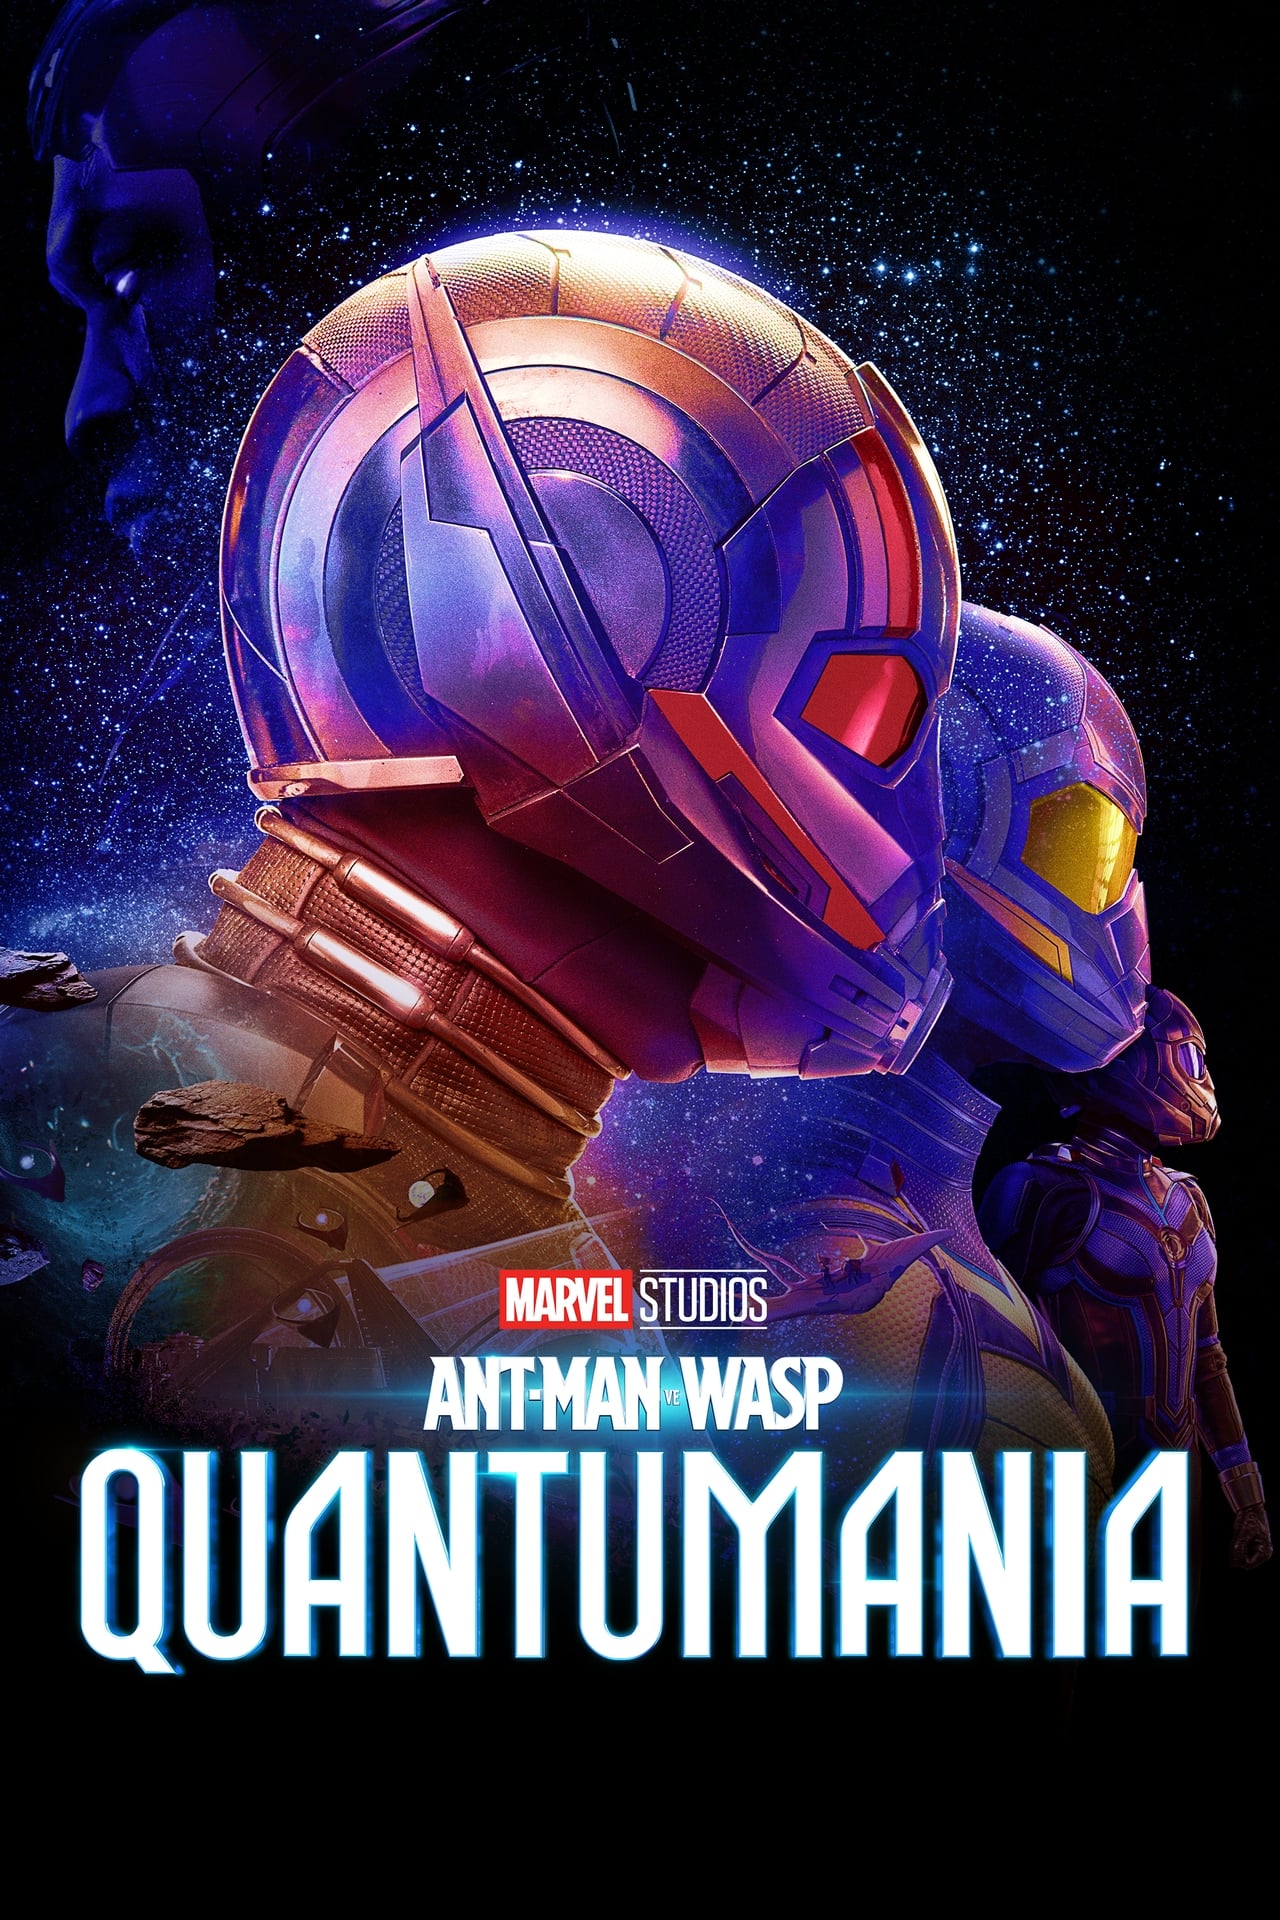 Ant-Man and the Wasp: Quantumania (2023) 384Kbps 23.976Fps 48Khz 5.1Ch Disney+ DD+ AC3 Turkish Audio TAC